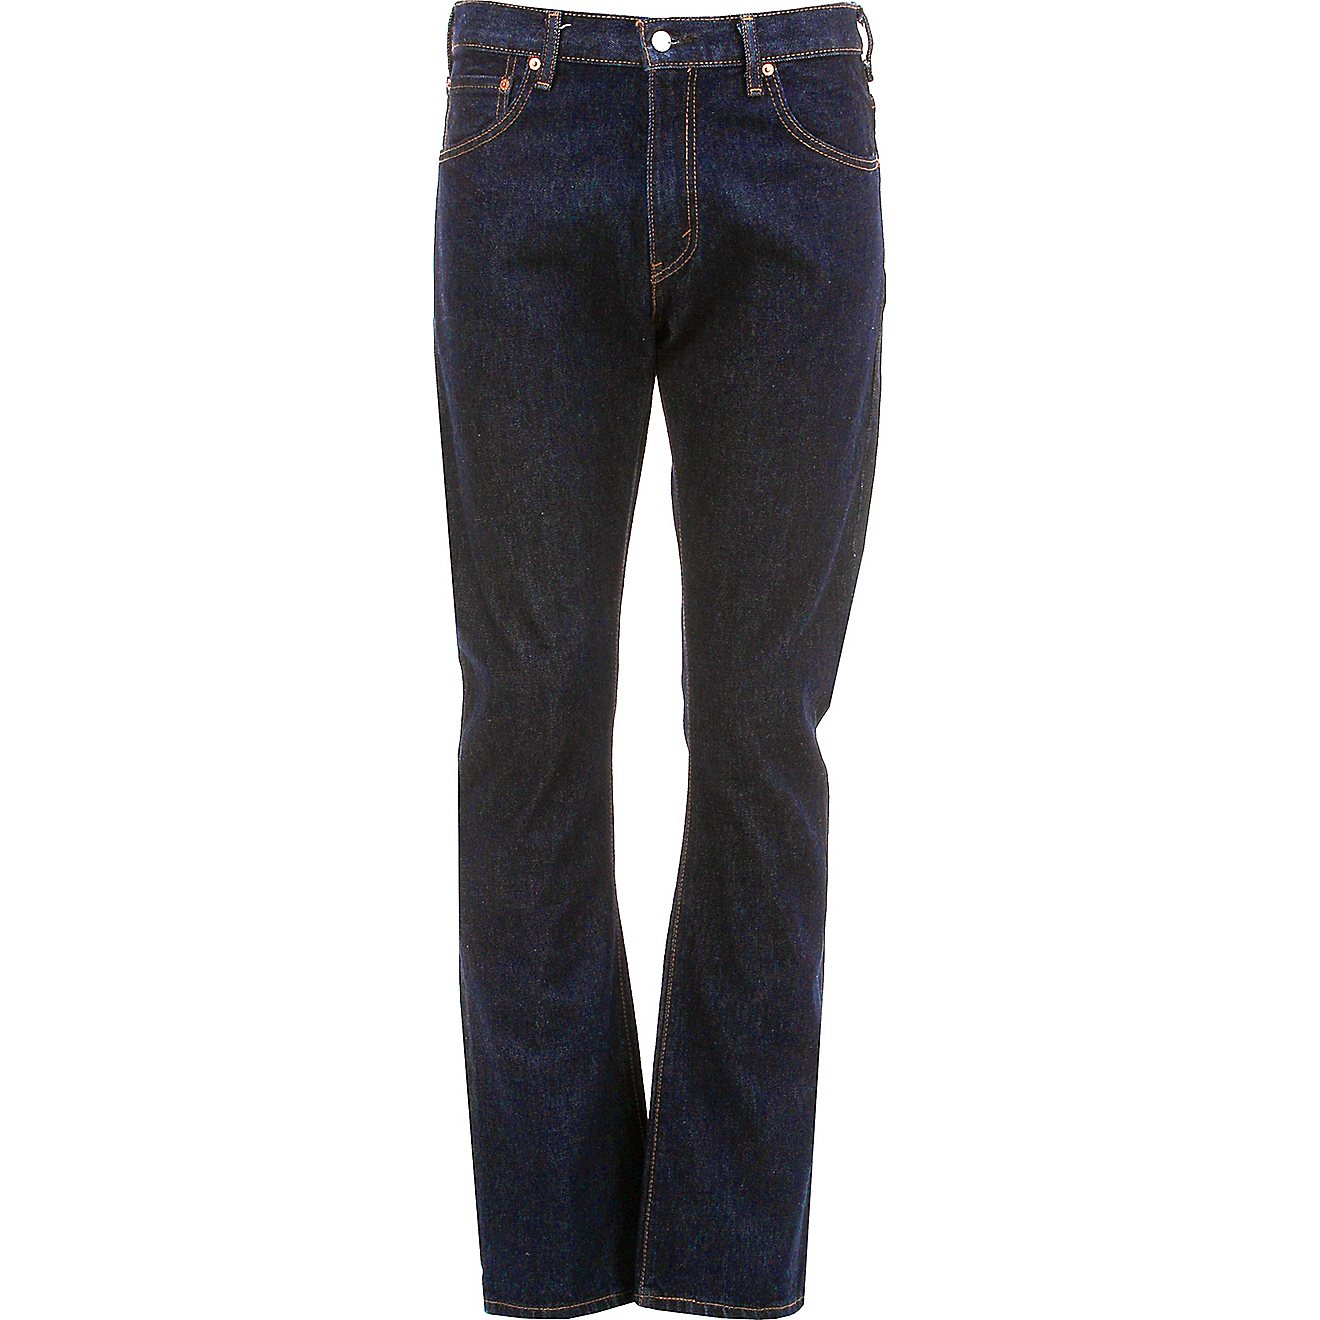 Levi's Men's 517 Boot Cut Jean | Free Shipping at Academy